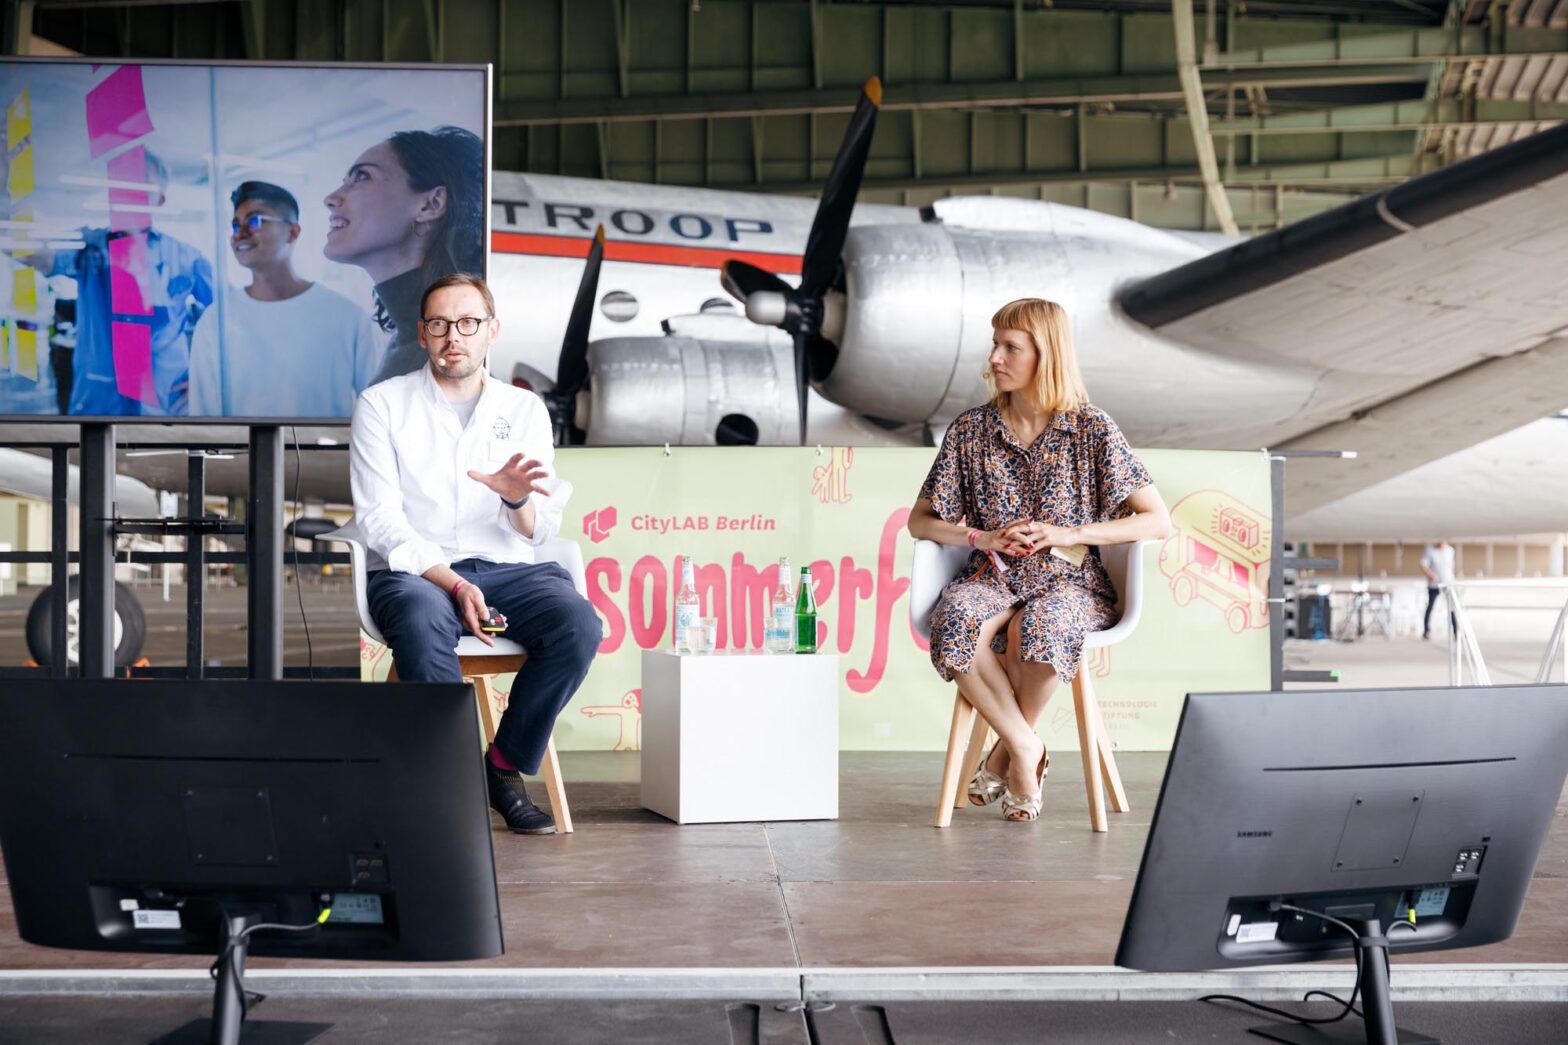 A man and a woman on a stage talking with an old airplane standing behind them